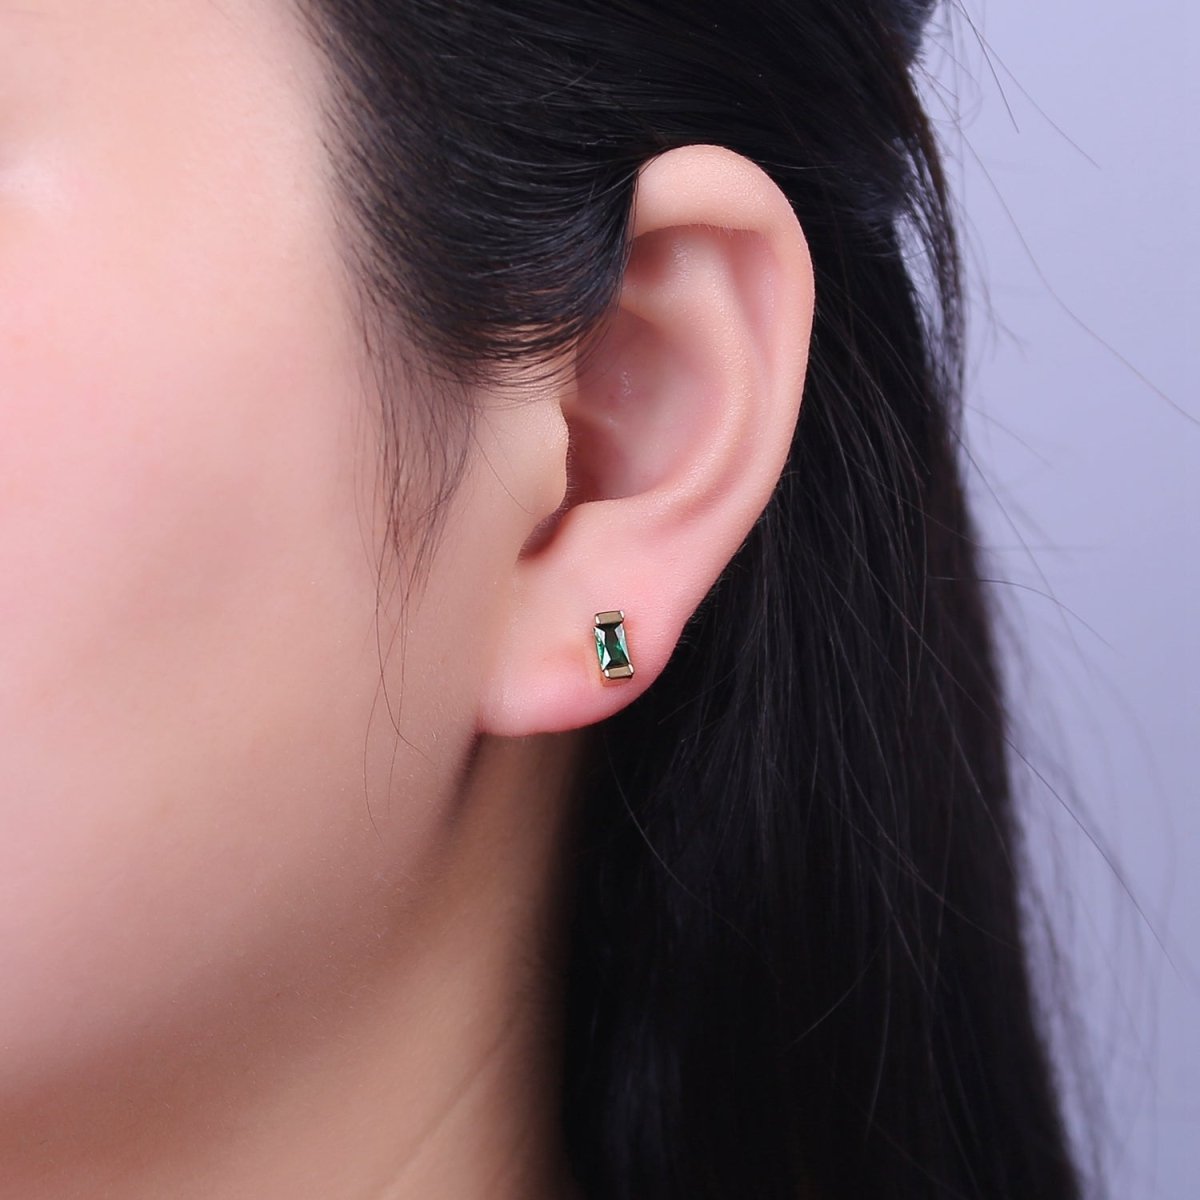 Dainty Emerald Green tiny baguette stud earrings | second hole earrings | tiny rectangle studs | Baguette shaped studs V-160 - DLUXCA